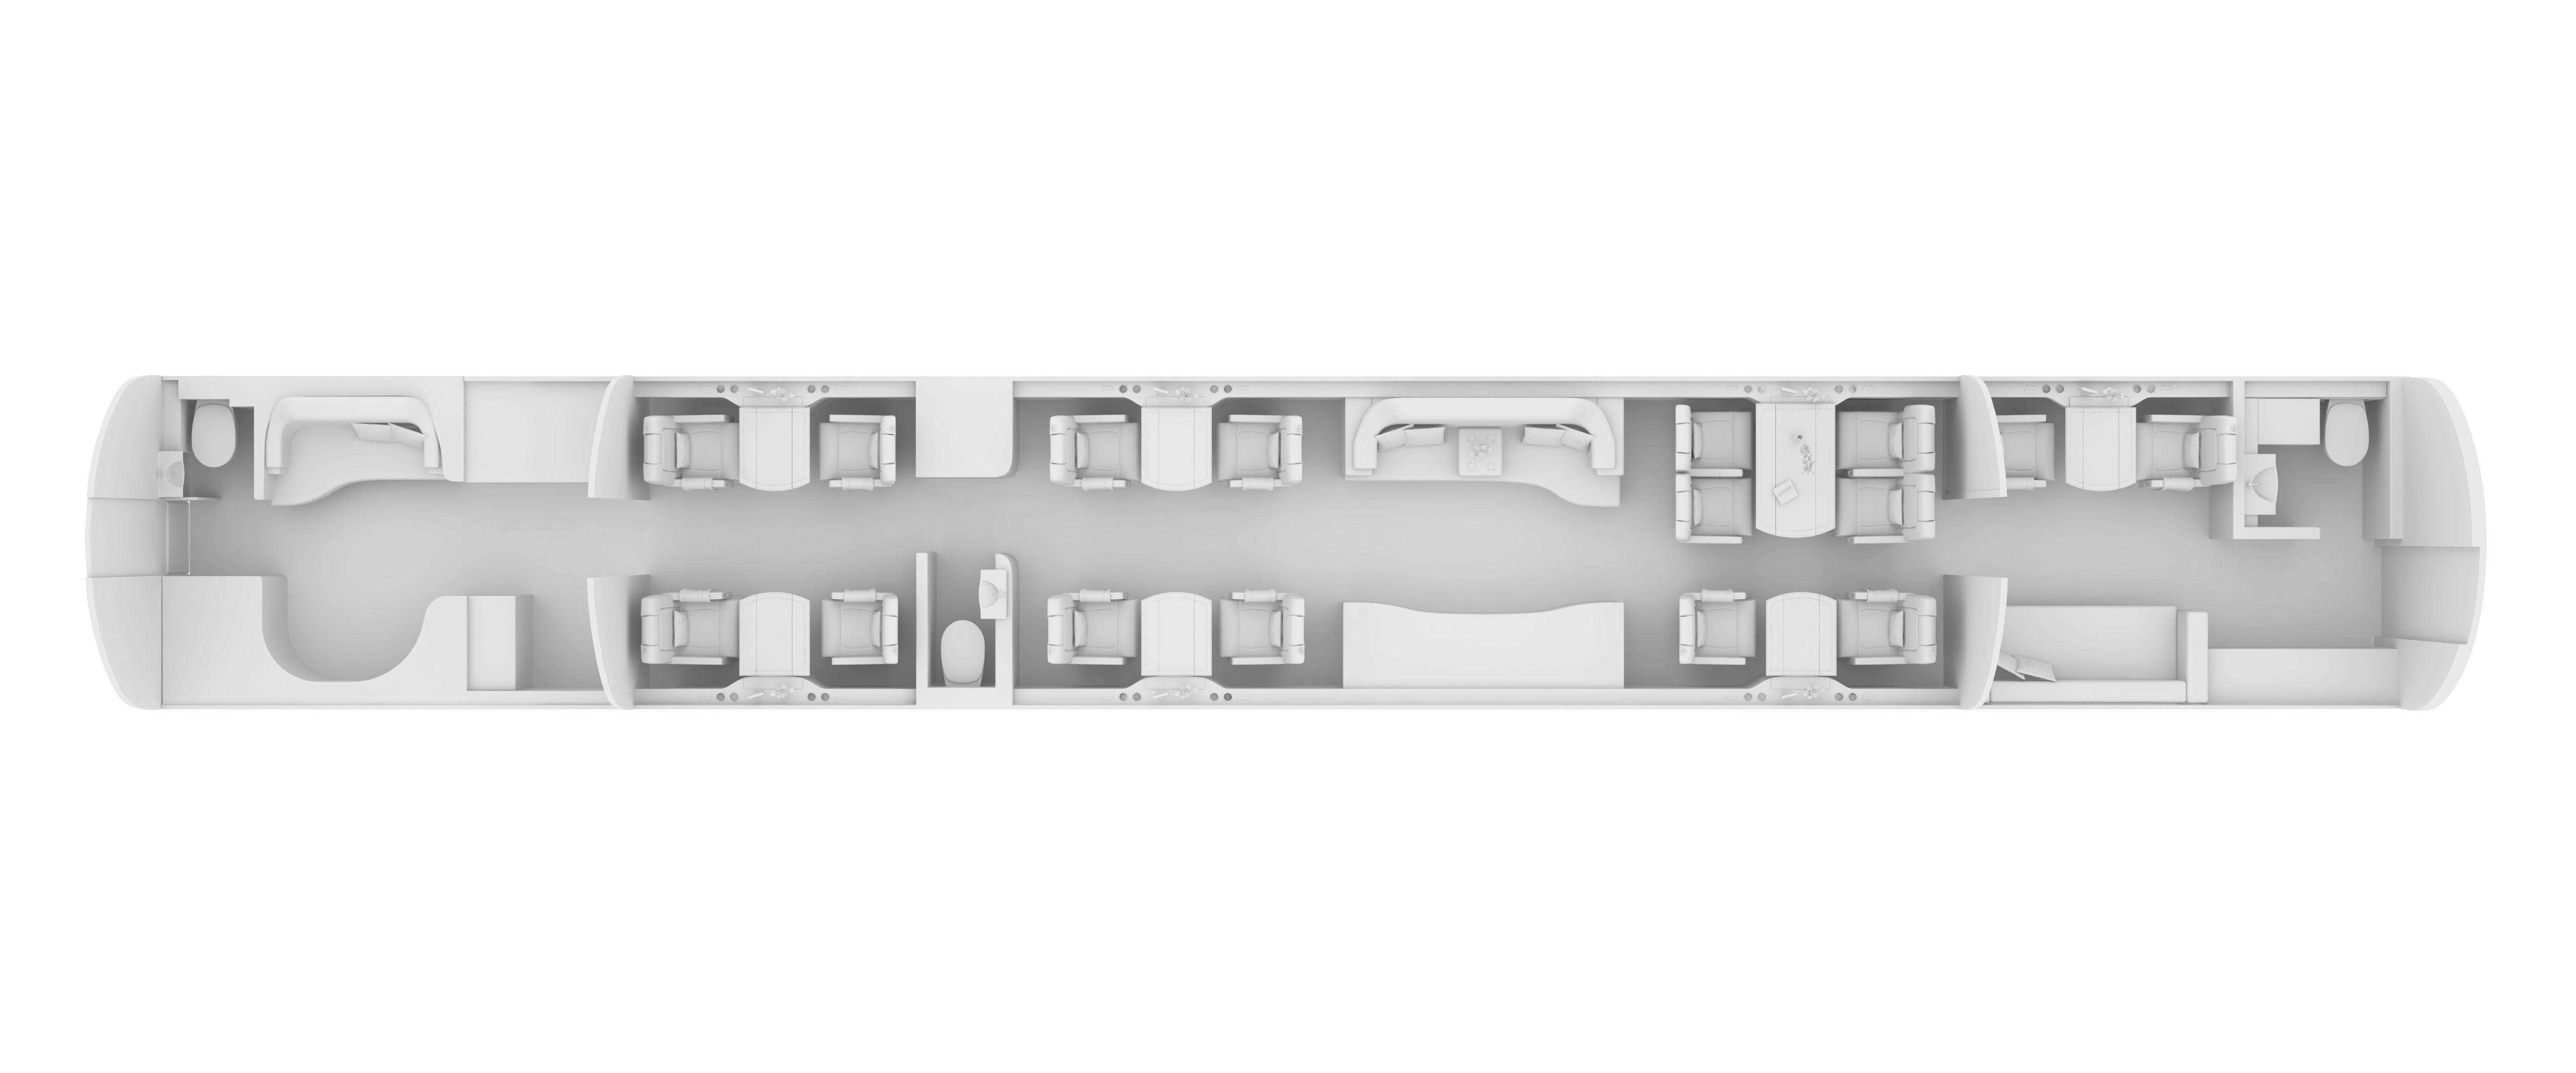 Embraer Lineage 1000_Floor Plan_Day